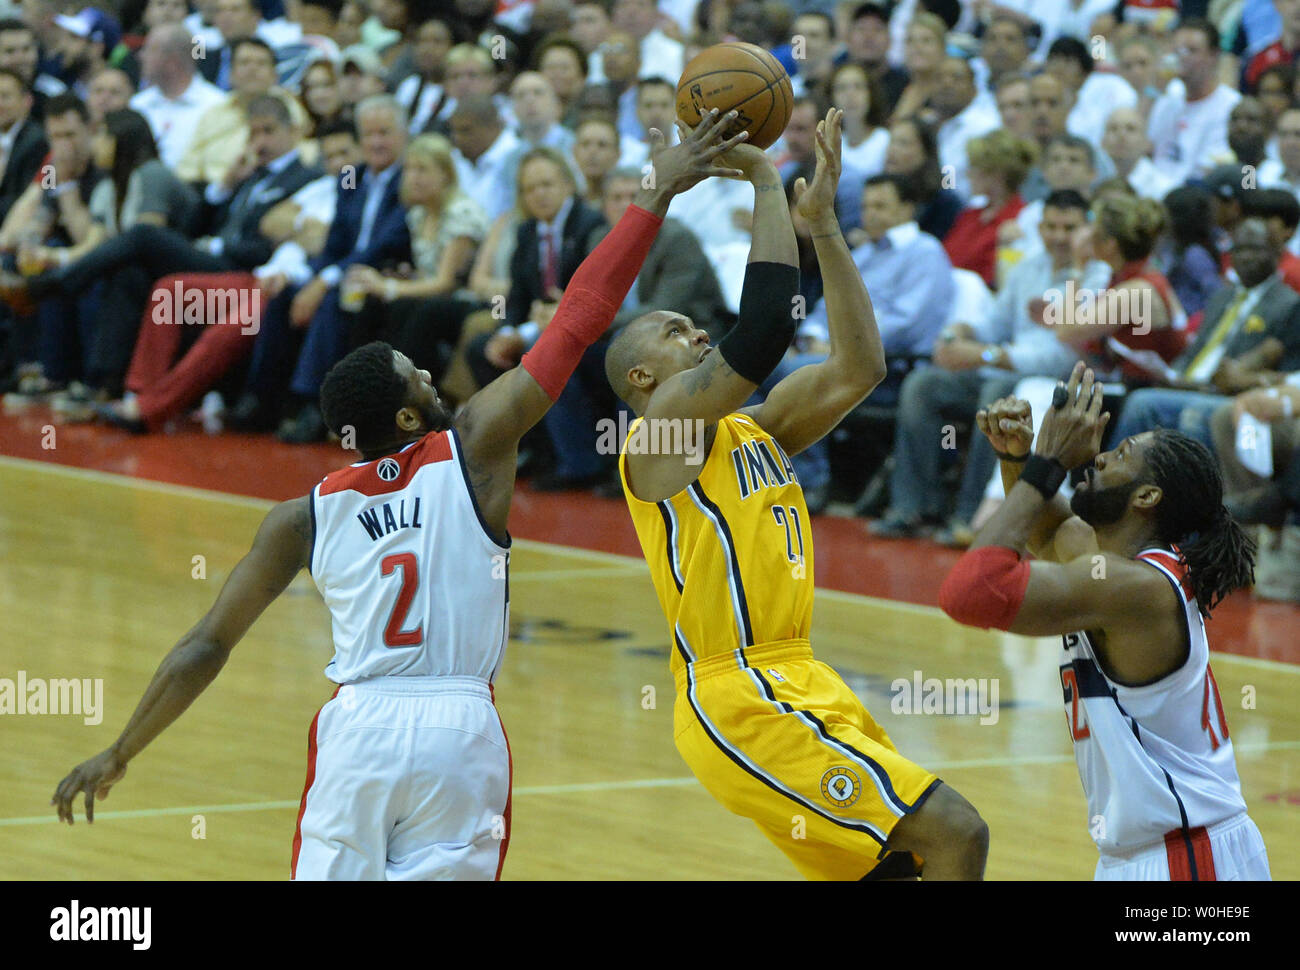 Washington Wizards guard John Wall (2) steals the ball from Indiana Pacers forward David West (21) during the 1st half of game six of the Eastern Conference Semifinals at the Verizon Center in Washington, D.C. on May 15, 2014. UPI/Kevin Dietsch Stock Photo